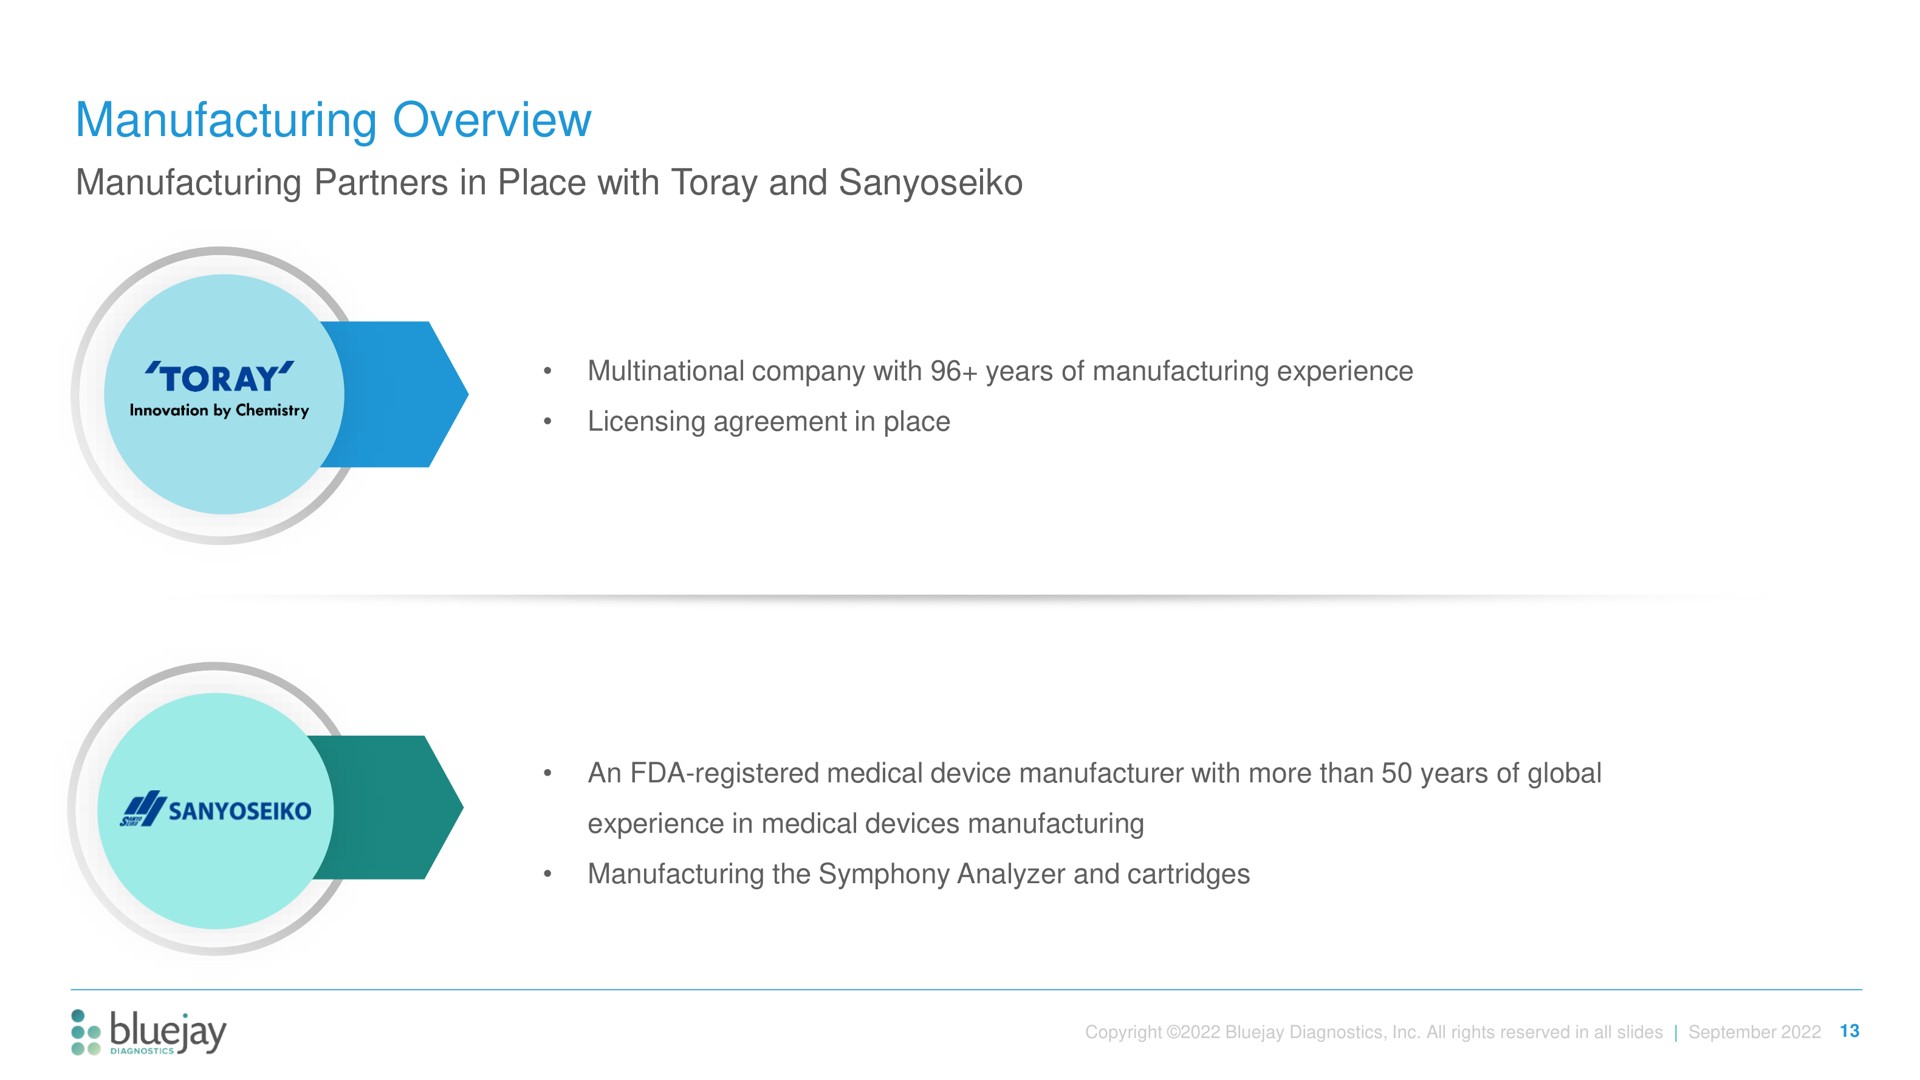 manufacturing overview | Bluejay